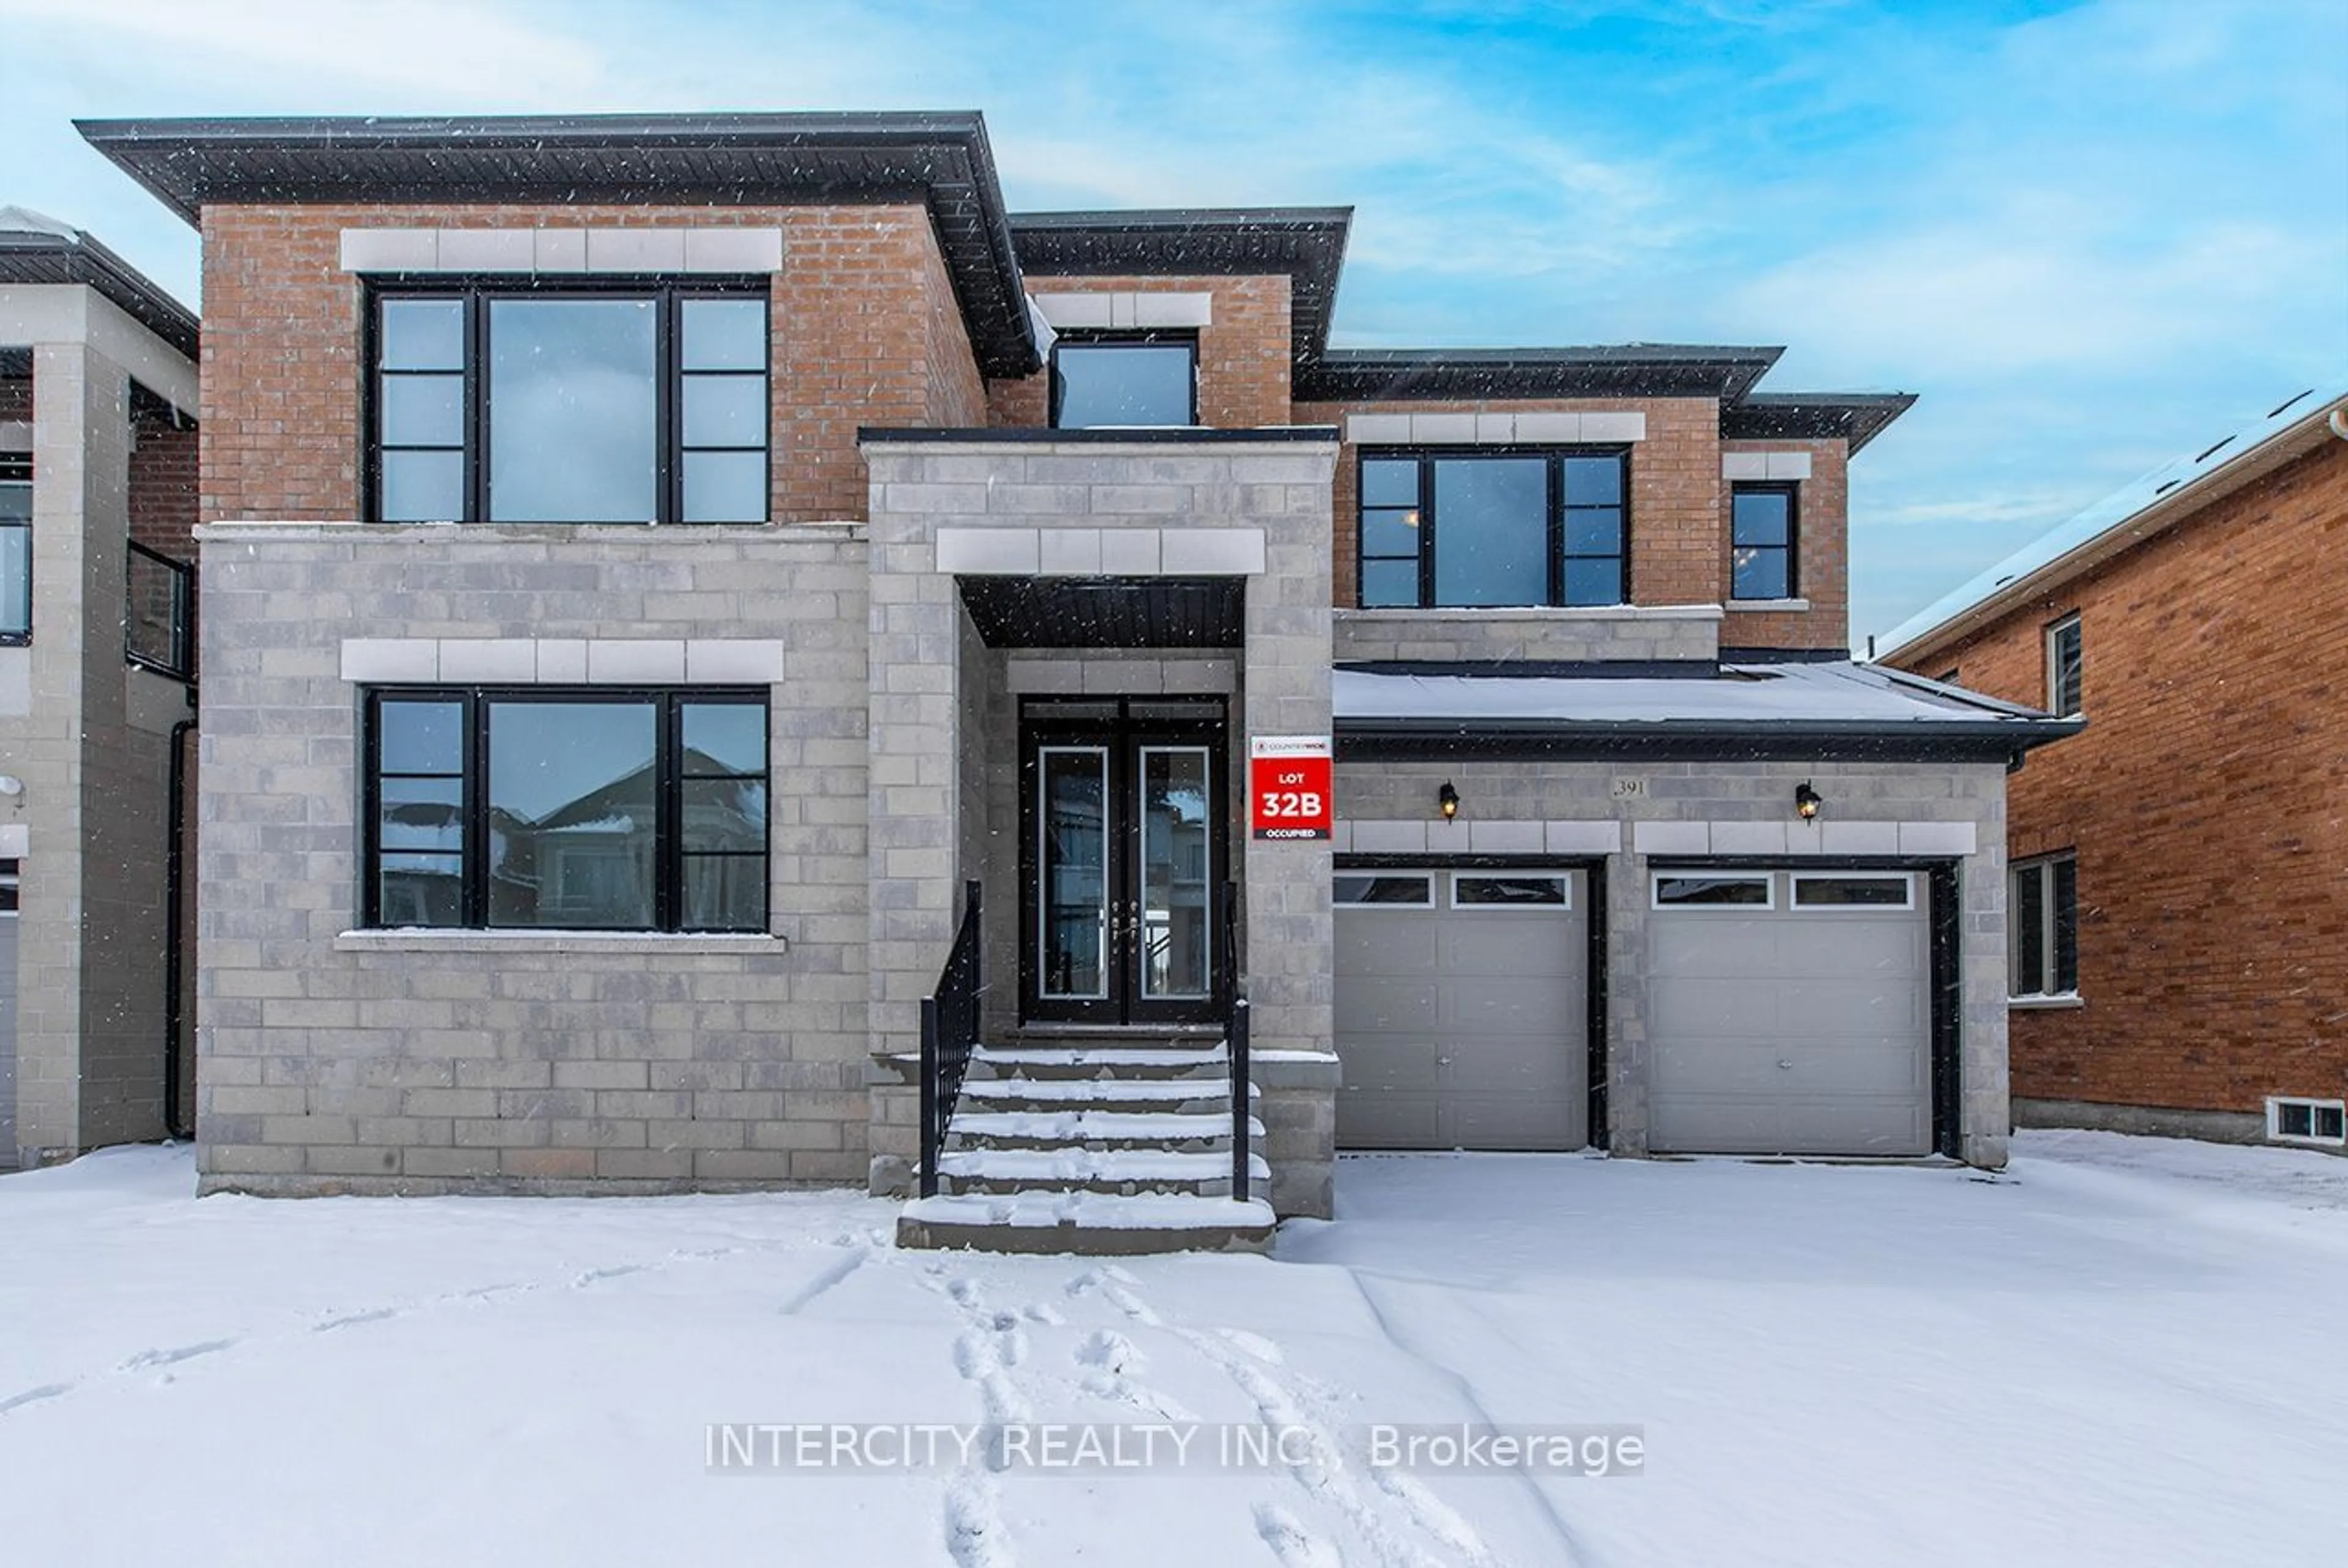 Home with brick exterior material for 391 Seaview Hts, East Gwillimbury Ontario L9N 0Y4